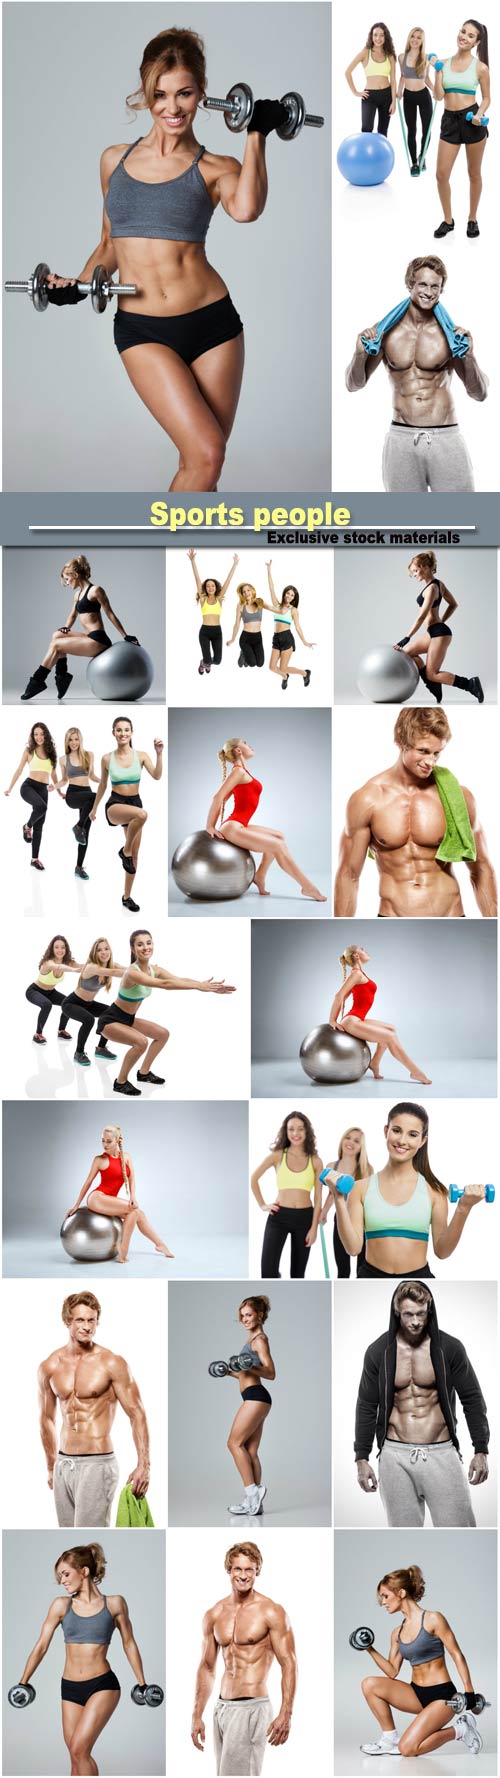 Fitness with dumbbells, group exercise classes, strong athletic muscle man